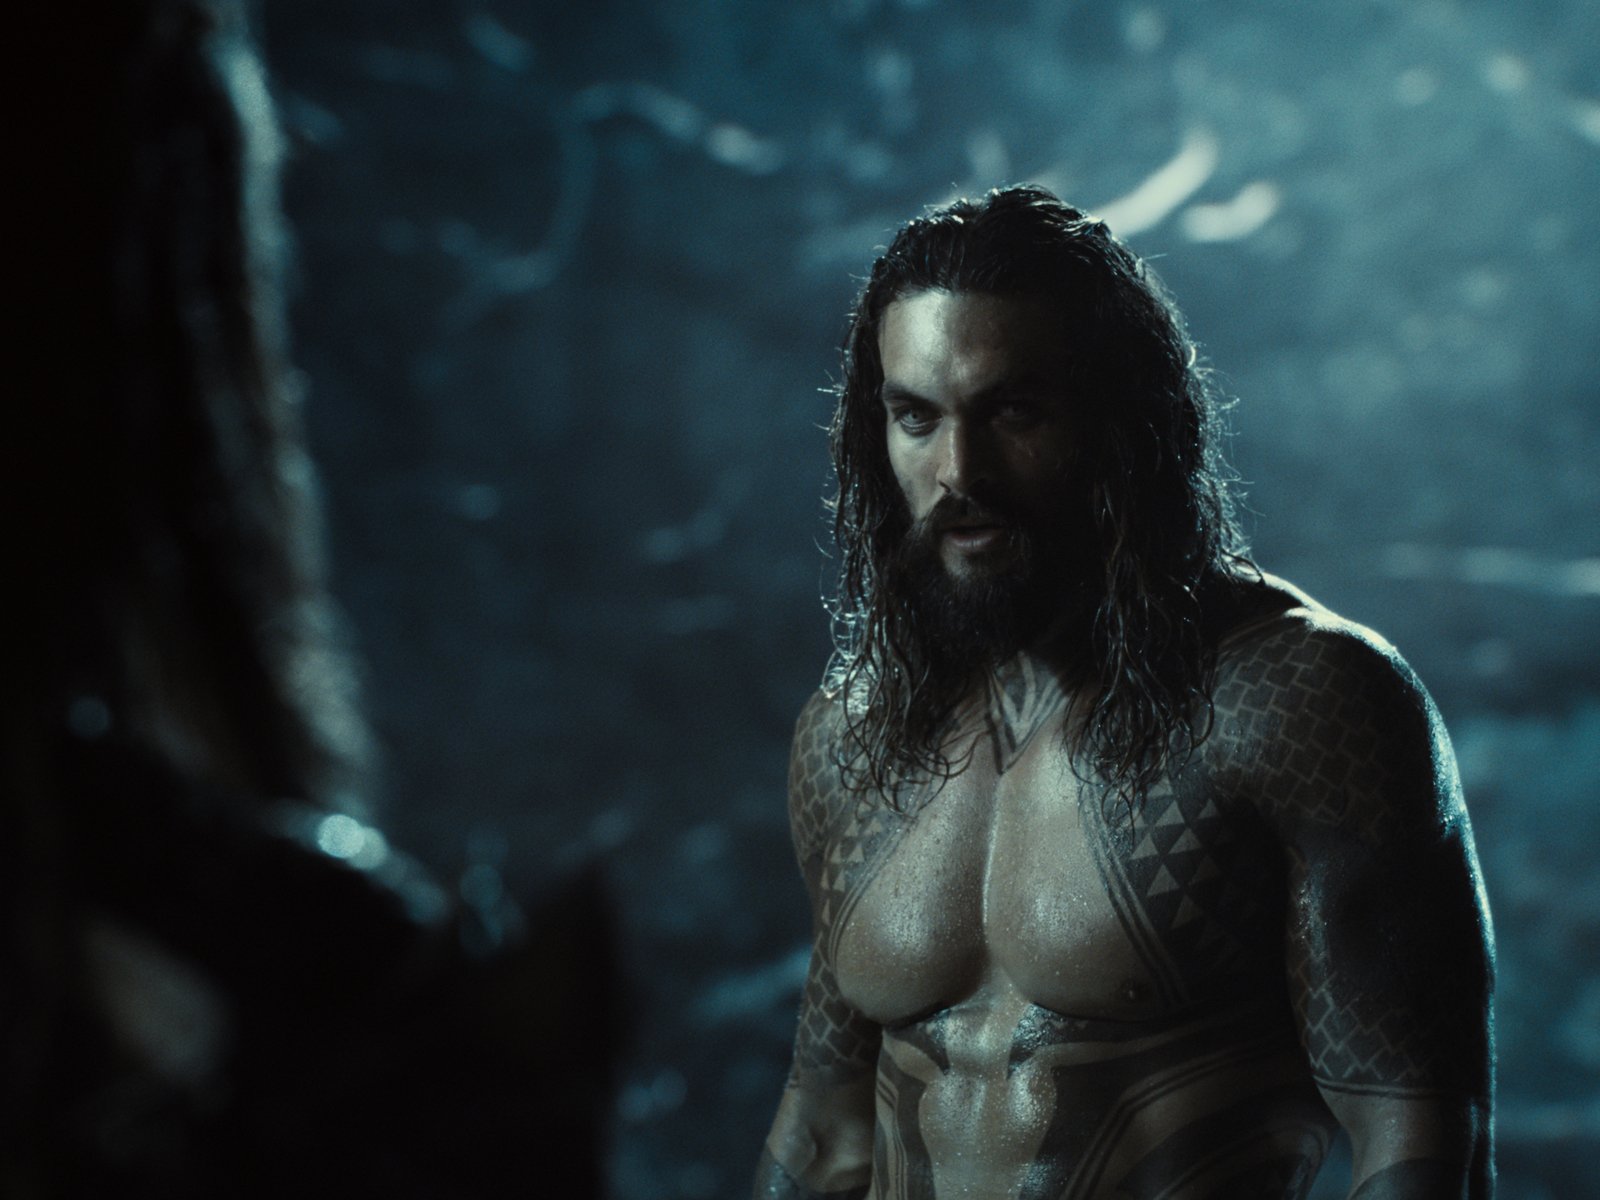 Jason Momoa as Aquaman in 'Zack Snyder's Justice League.' He's shirtless and staring at someone off-screen.